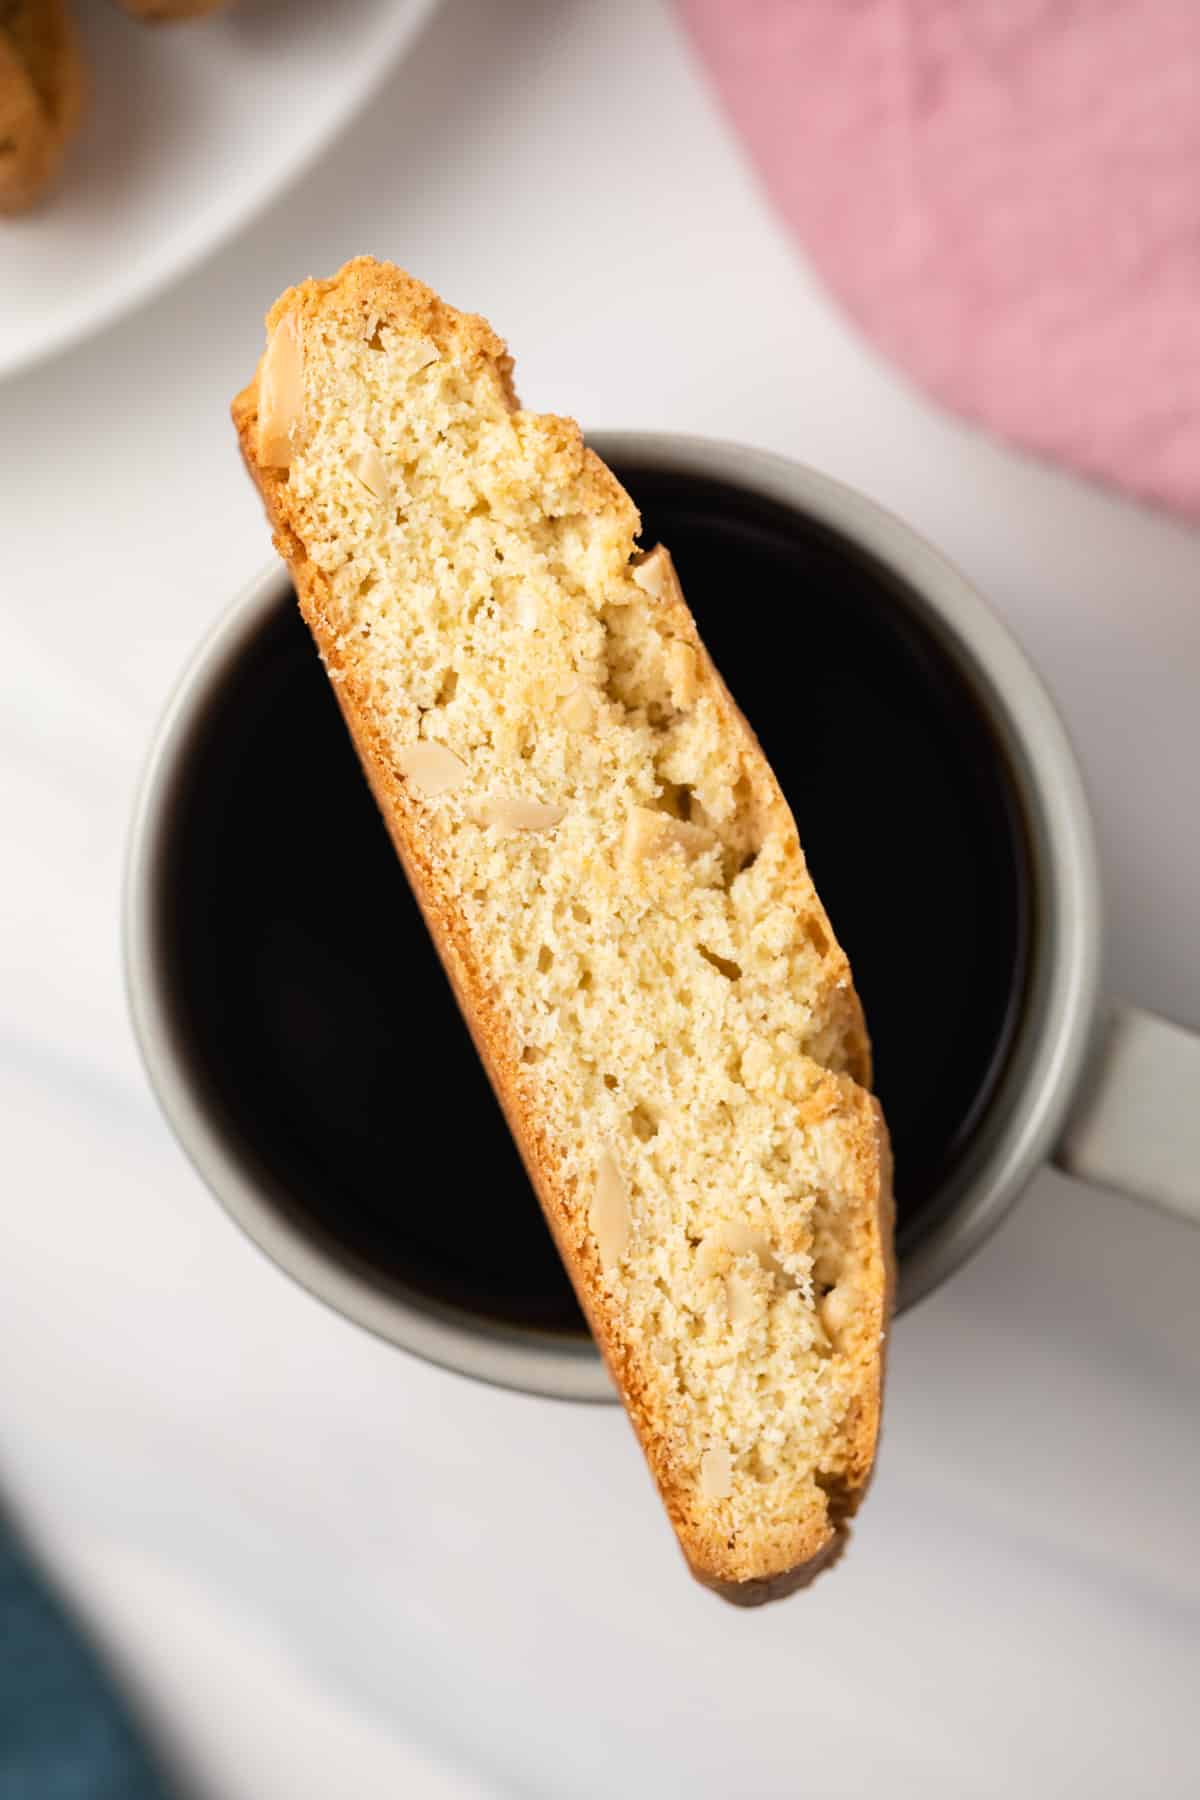 Almond biscotti over cup of coffee.